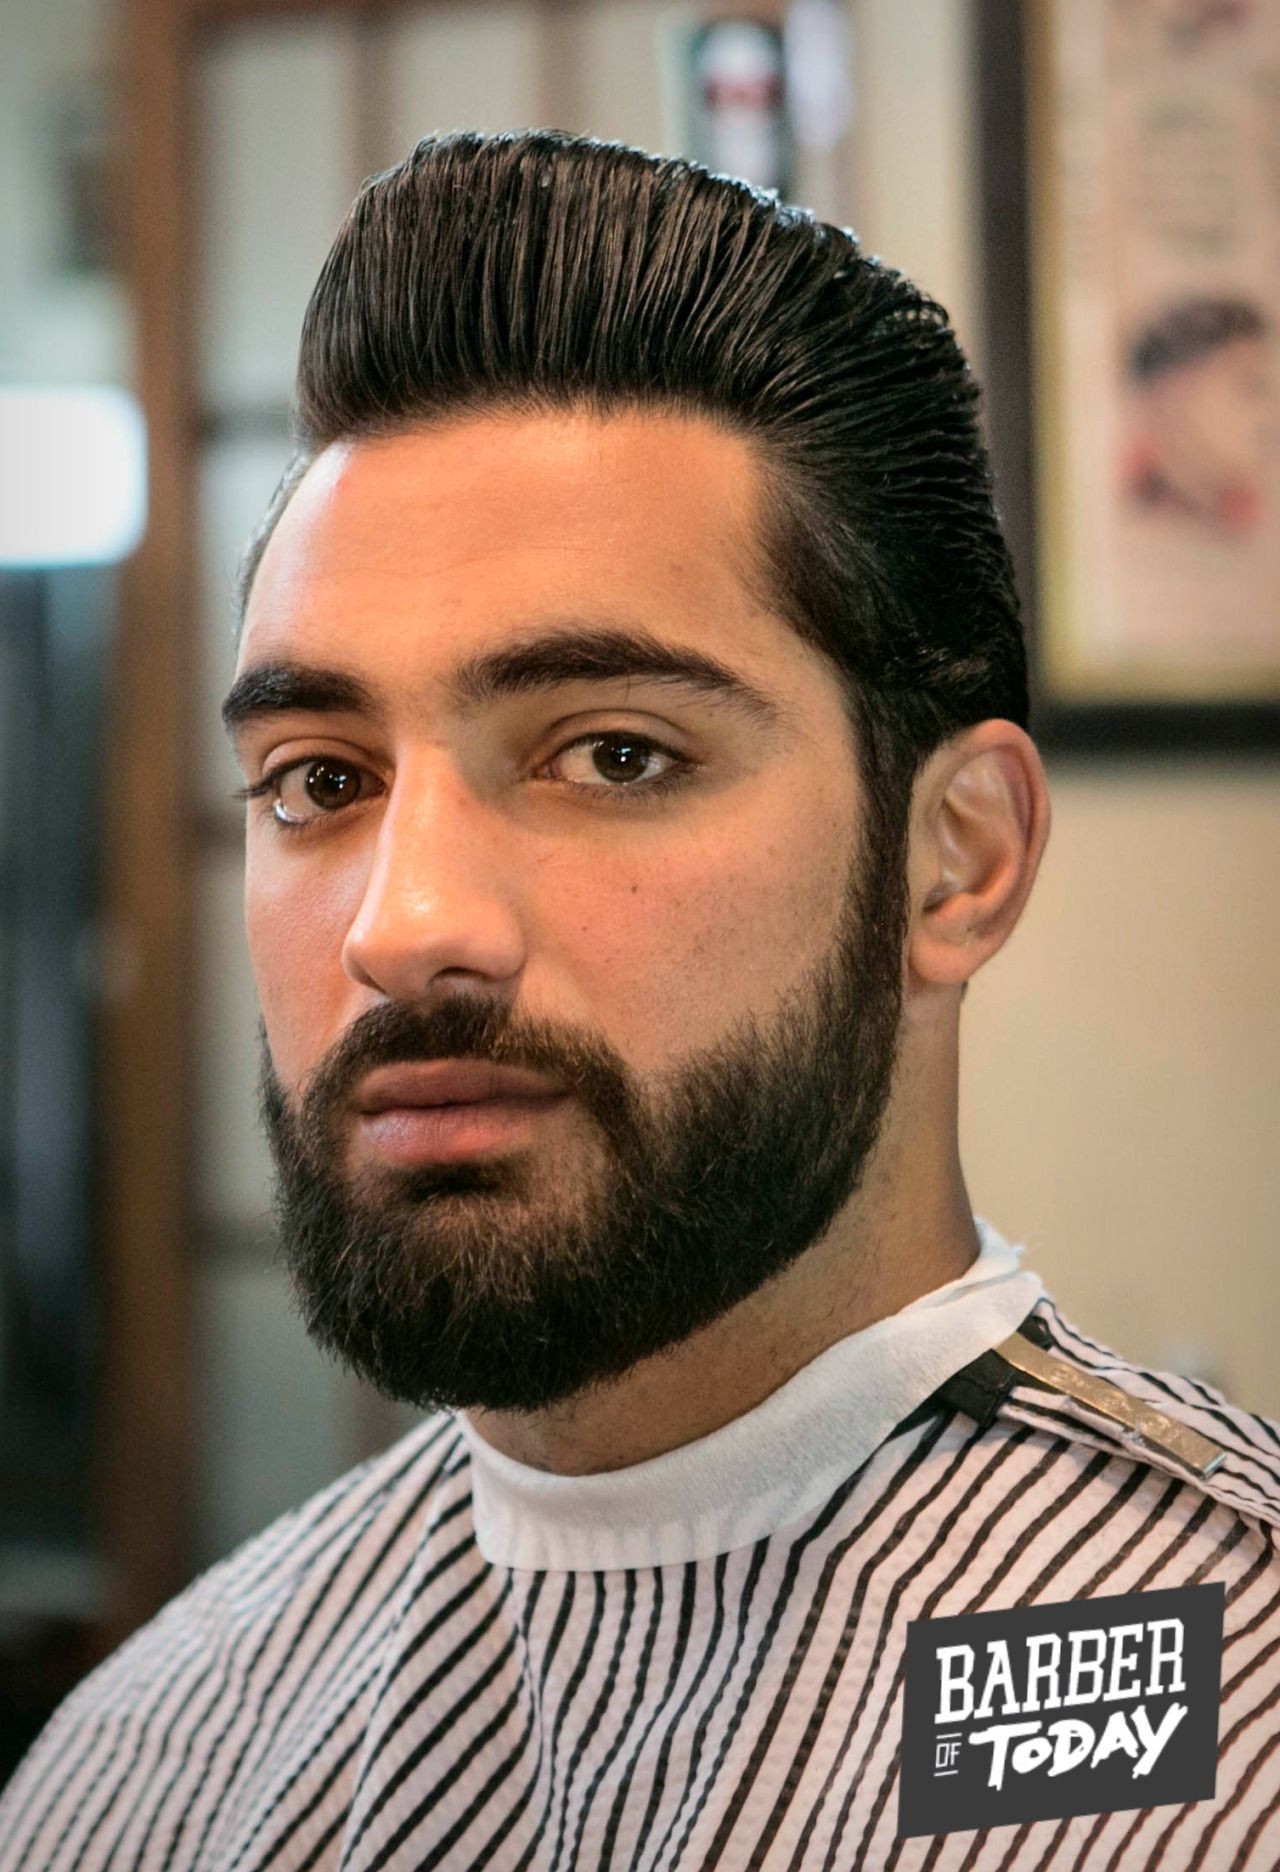 Todays Mens Hairstyles
 BARBER OF TODAY — Barber Today BARBEROFTODAY